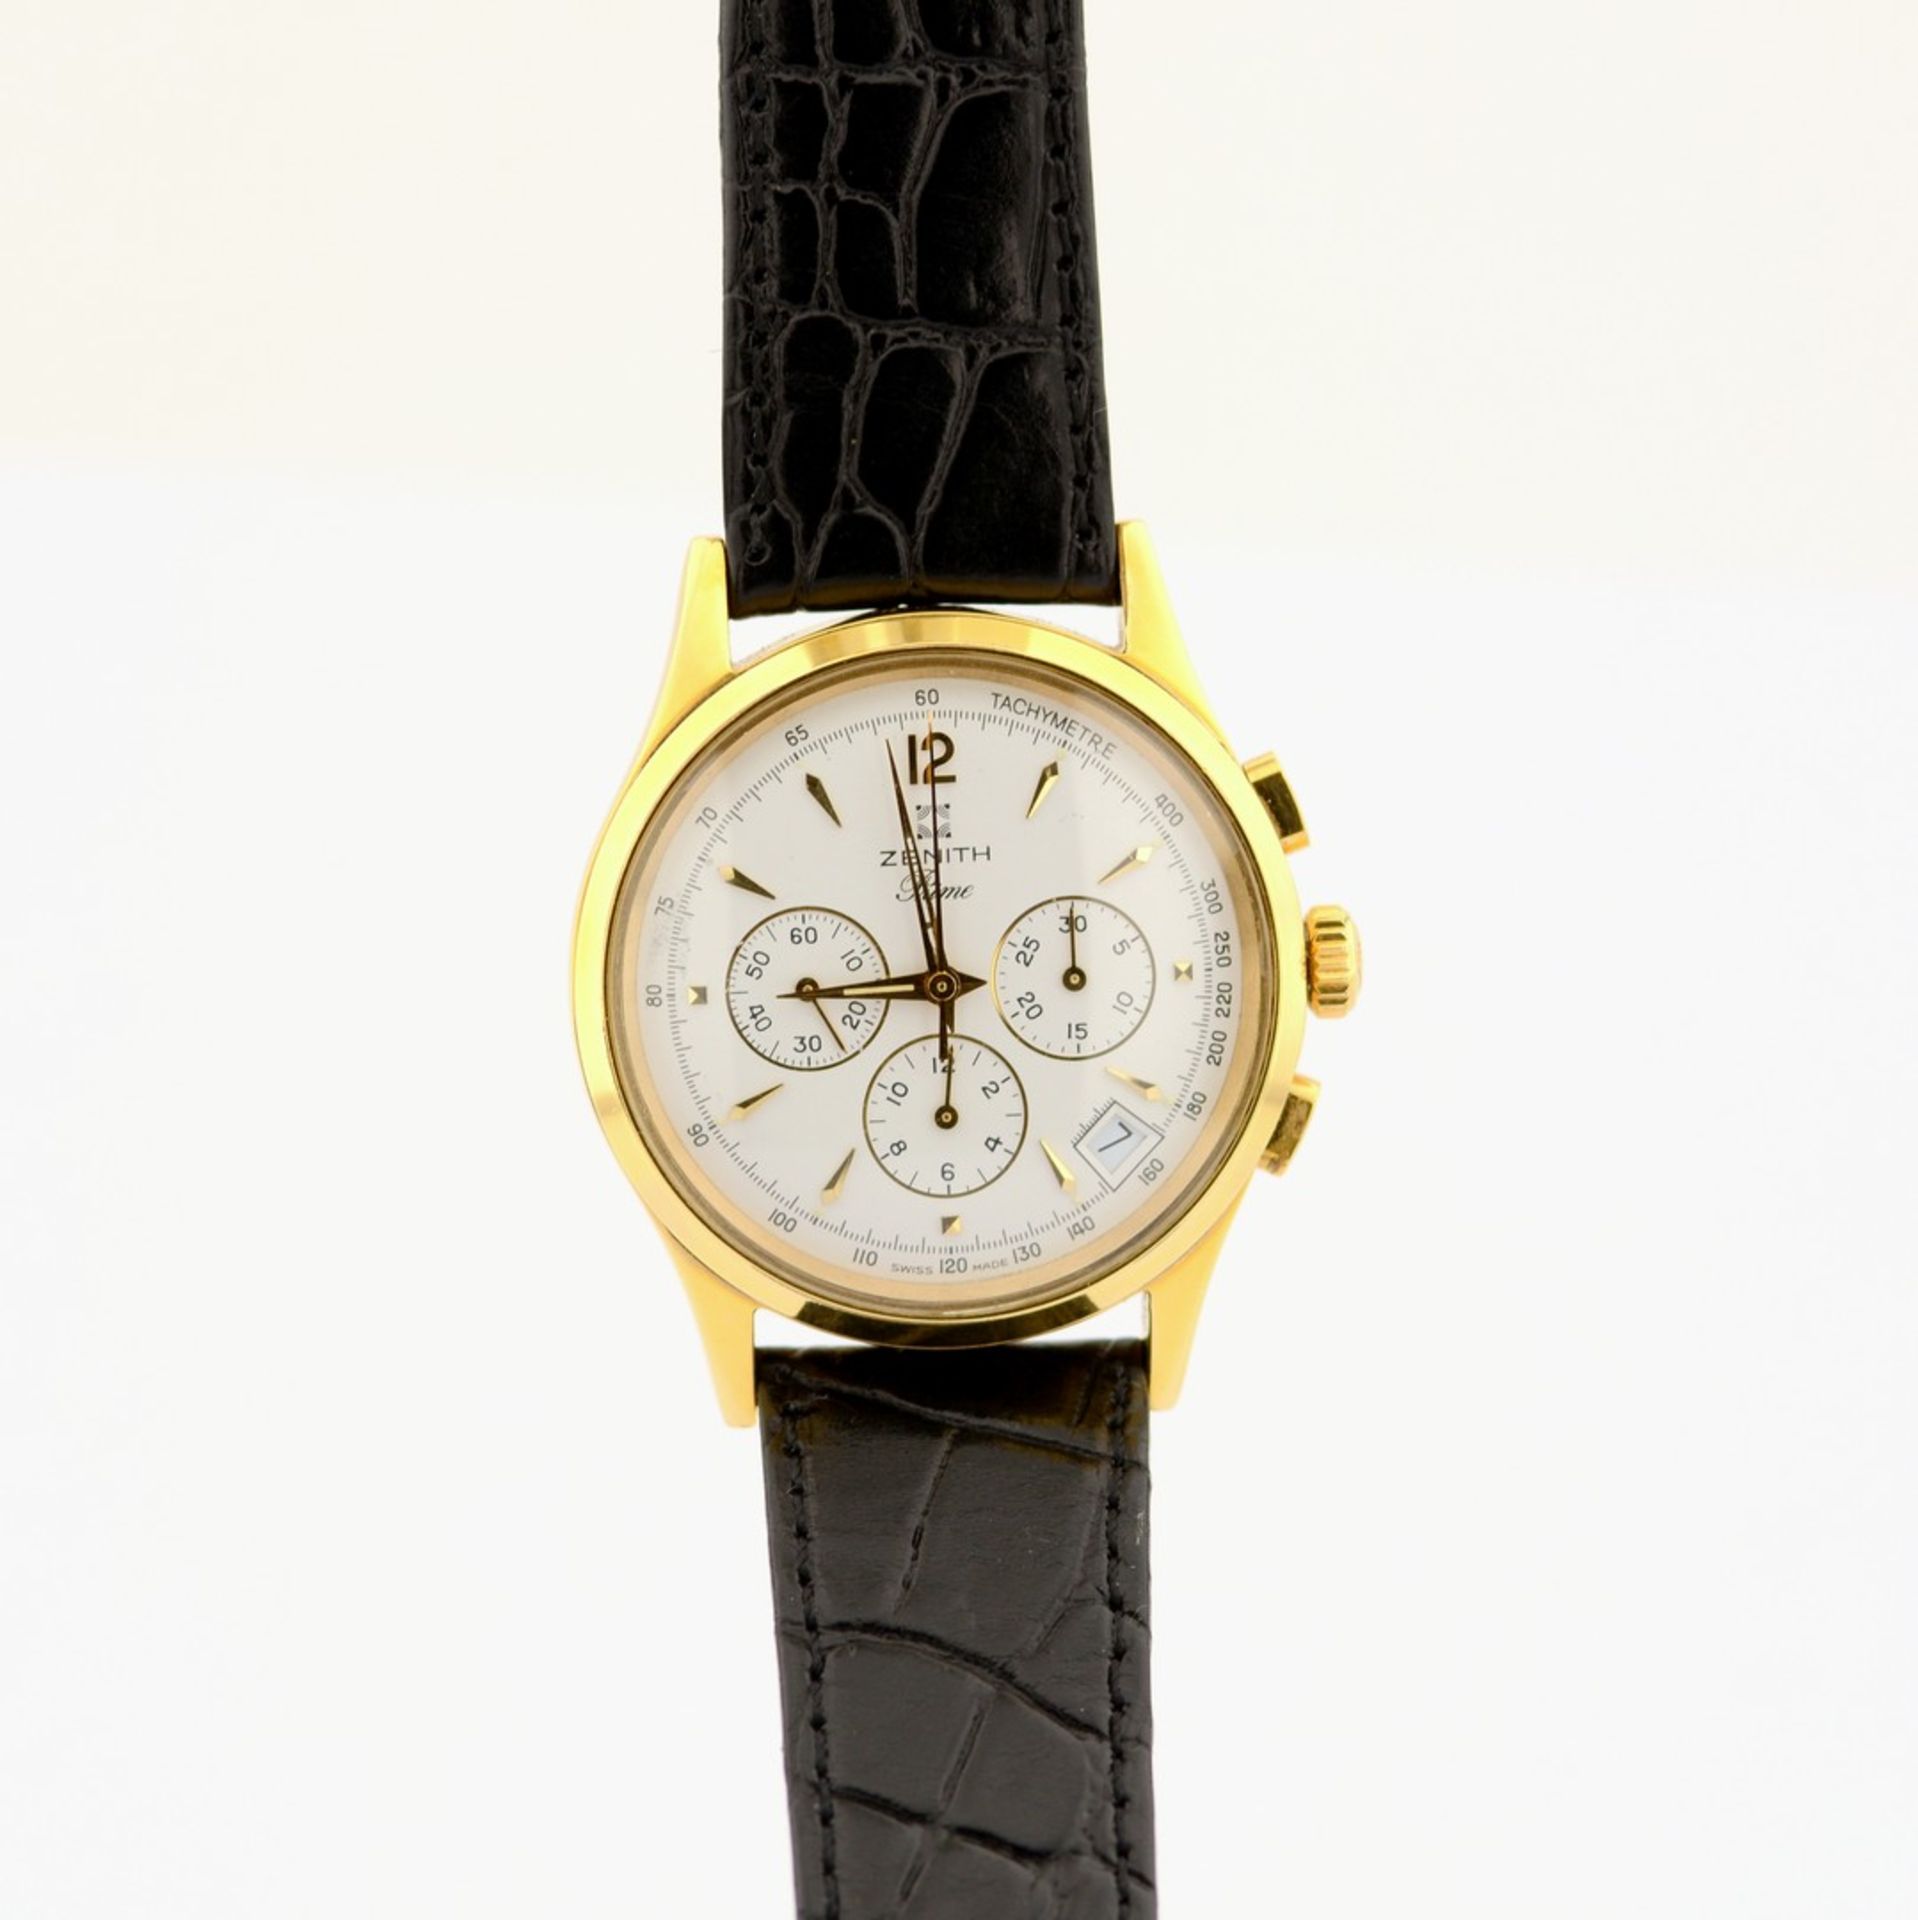 Zenith / Prime Chronograph - Gentlemen's Gold-plated Wristwatch - Image 4 of 8